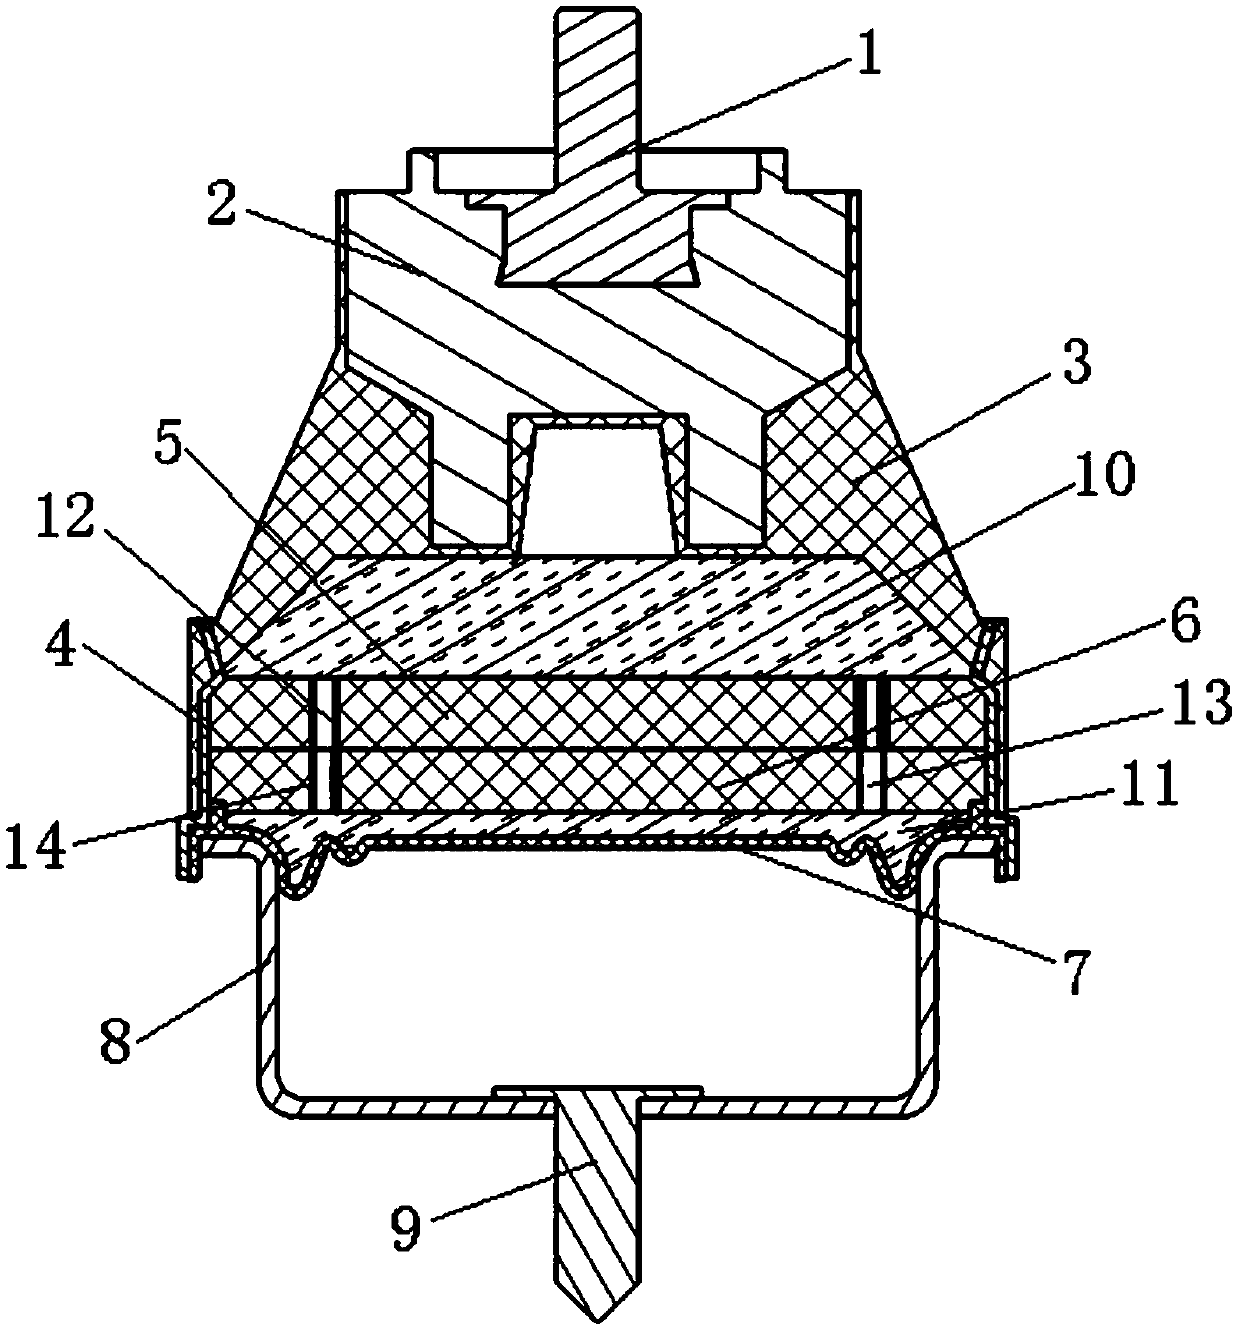 An active control hydraulic mount structure